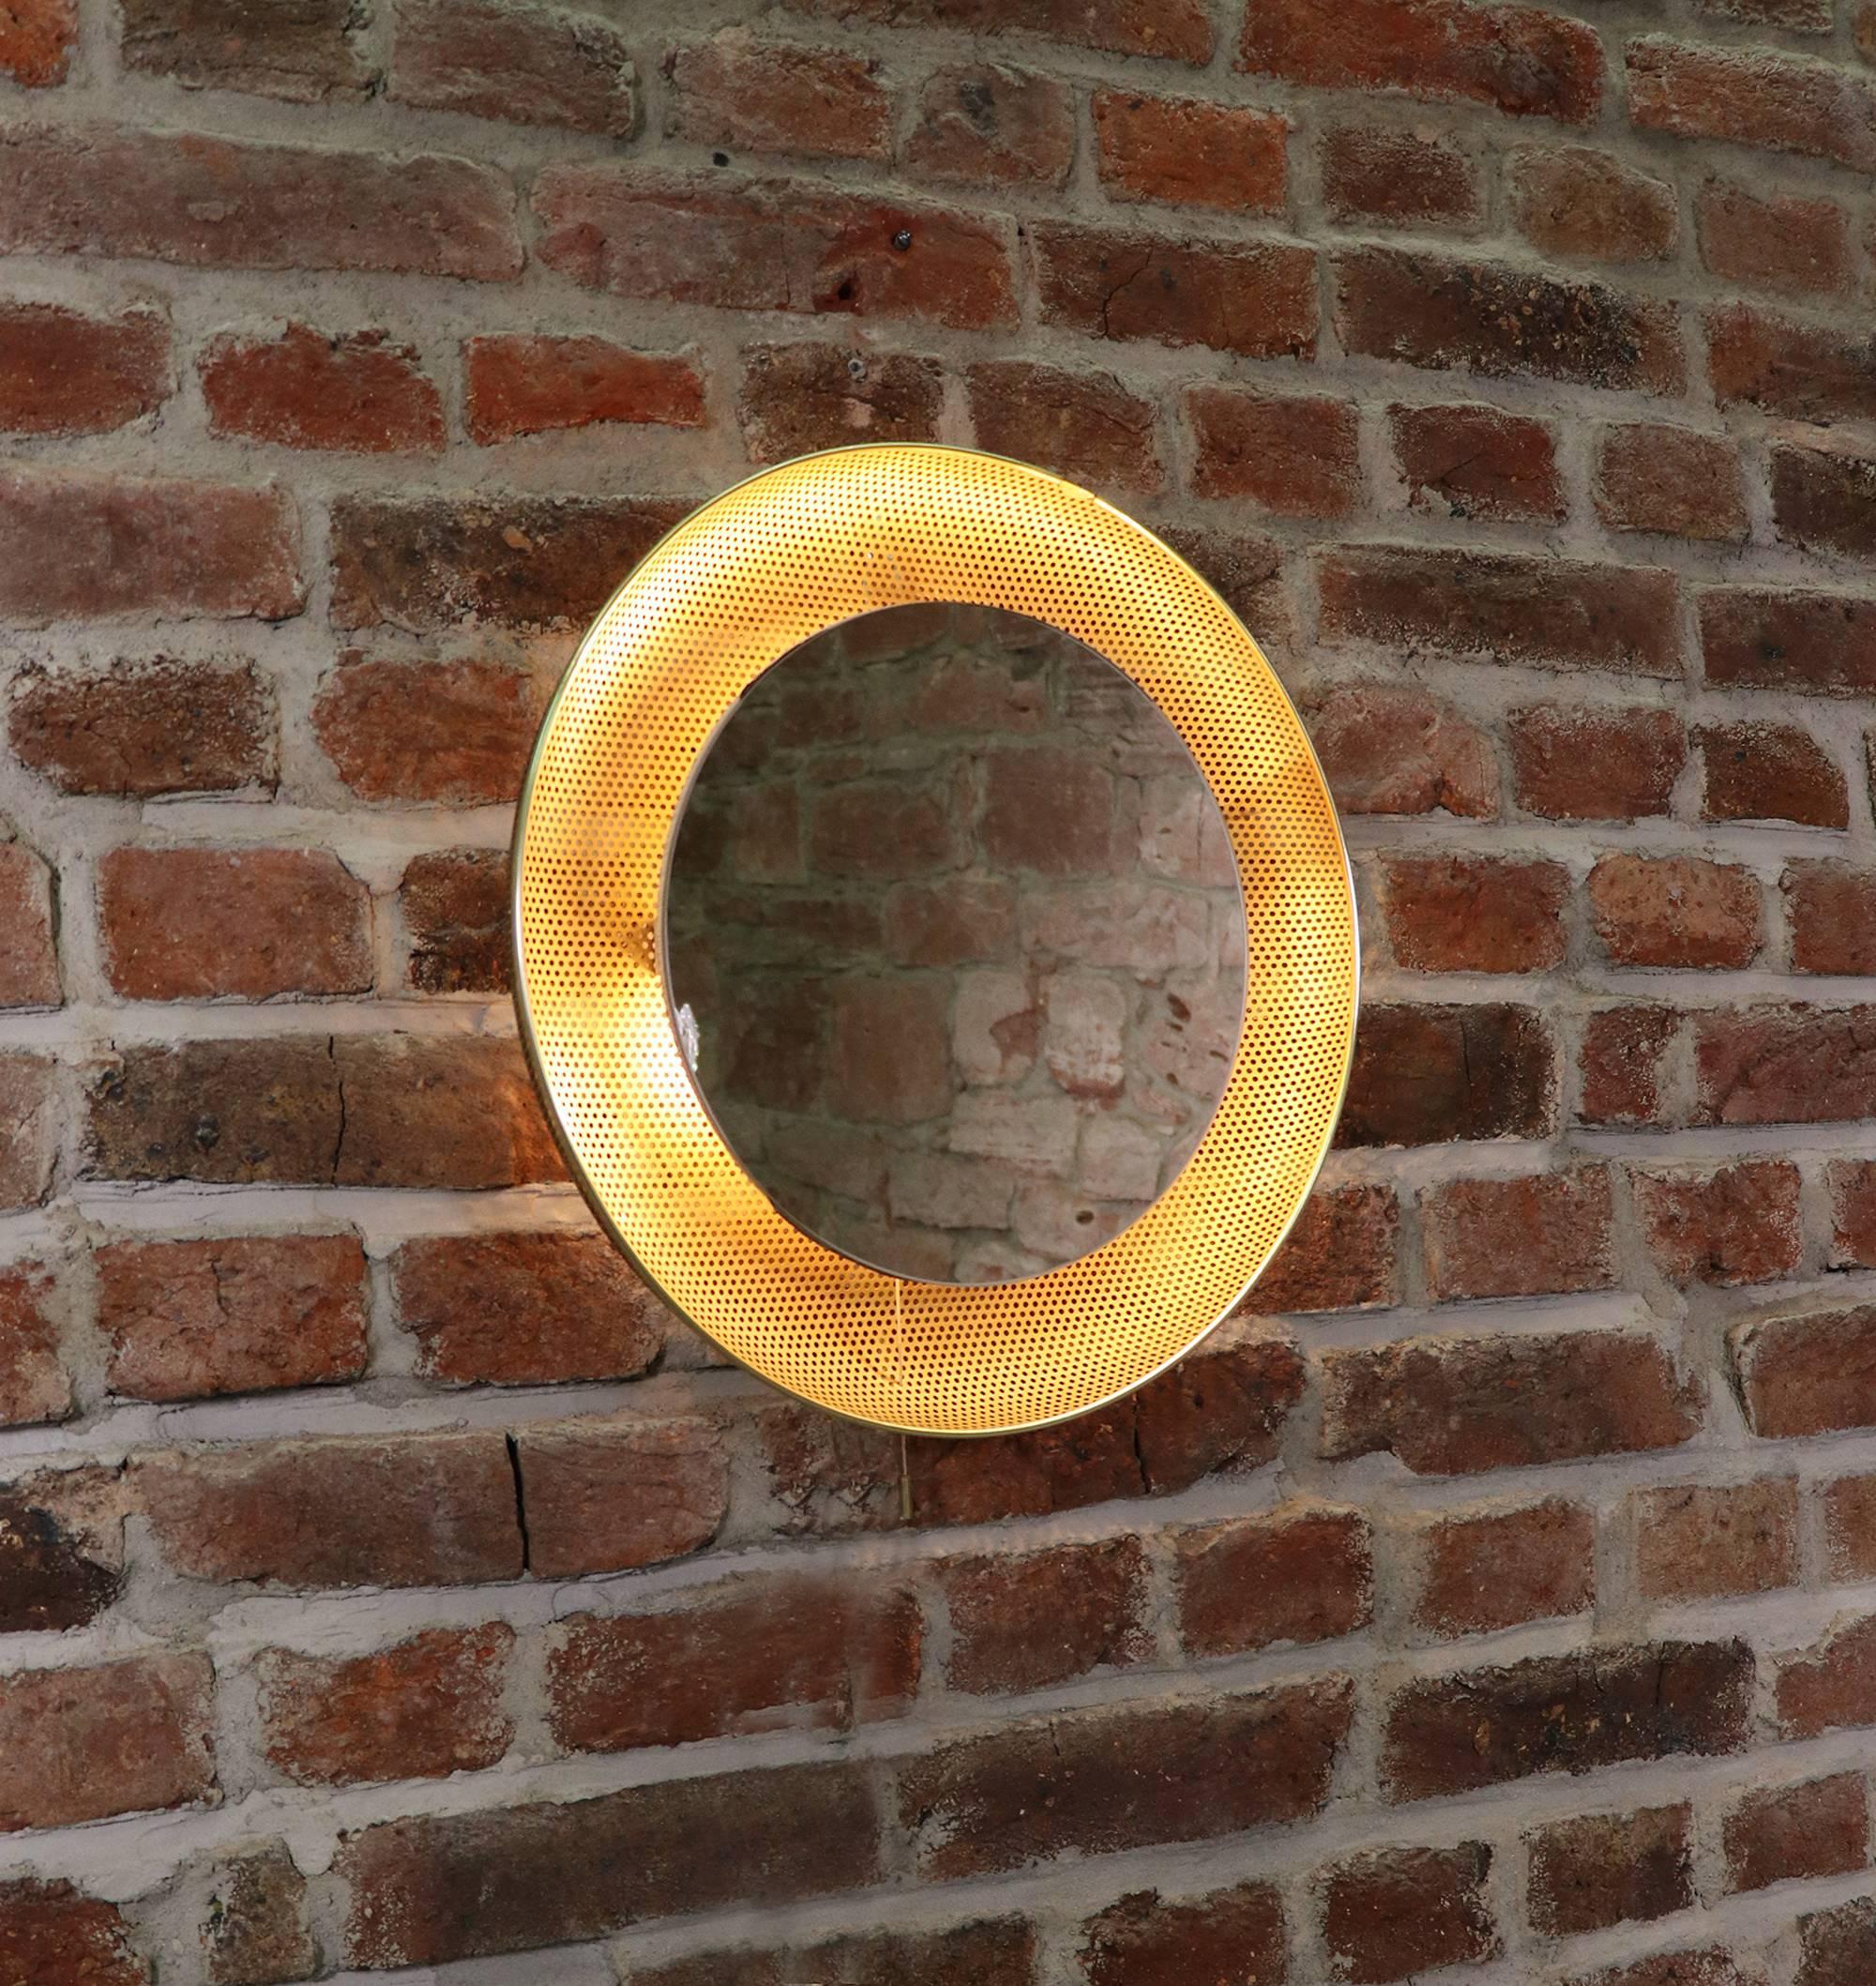 Perforated brass backlight wall mirror with pull string on/off switch.
Attributed to Mathieu Matégot for Artimeta, Netherlands. 
The mirror takes three small Edison bulbs.